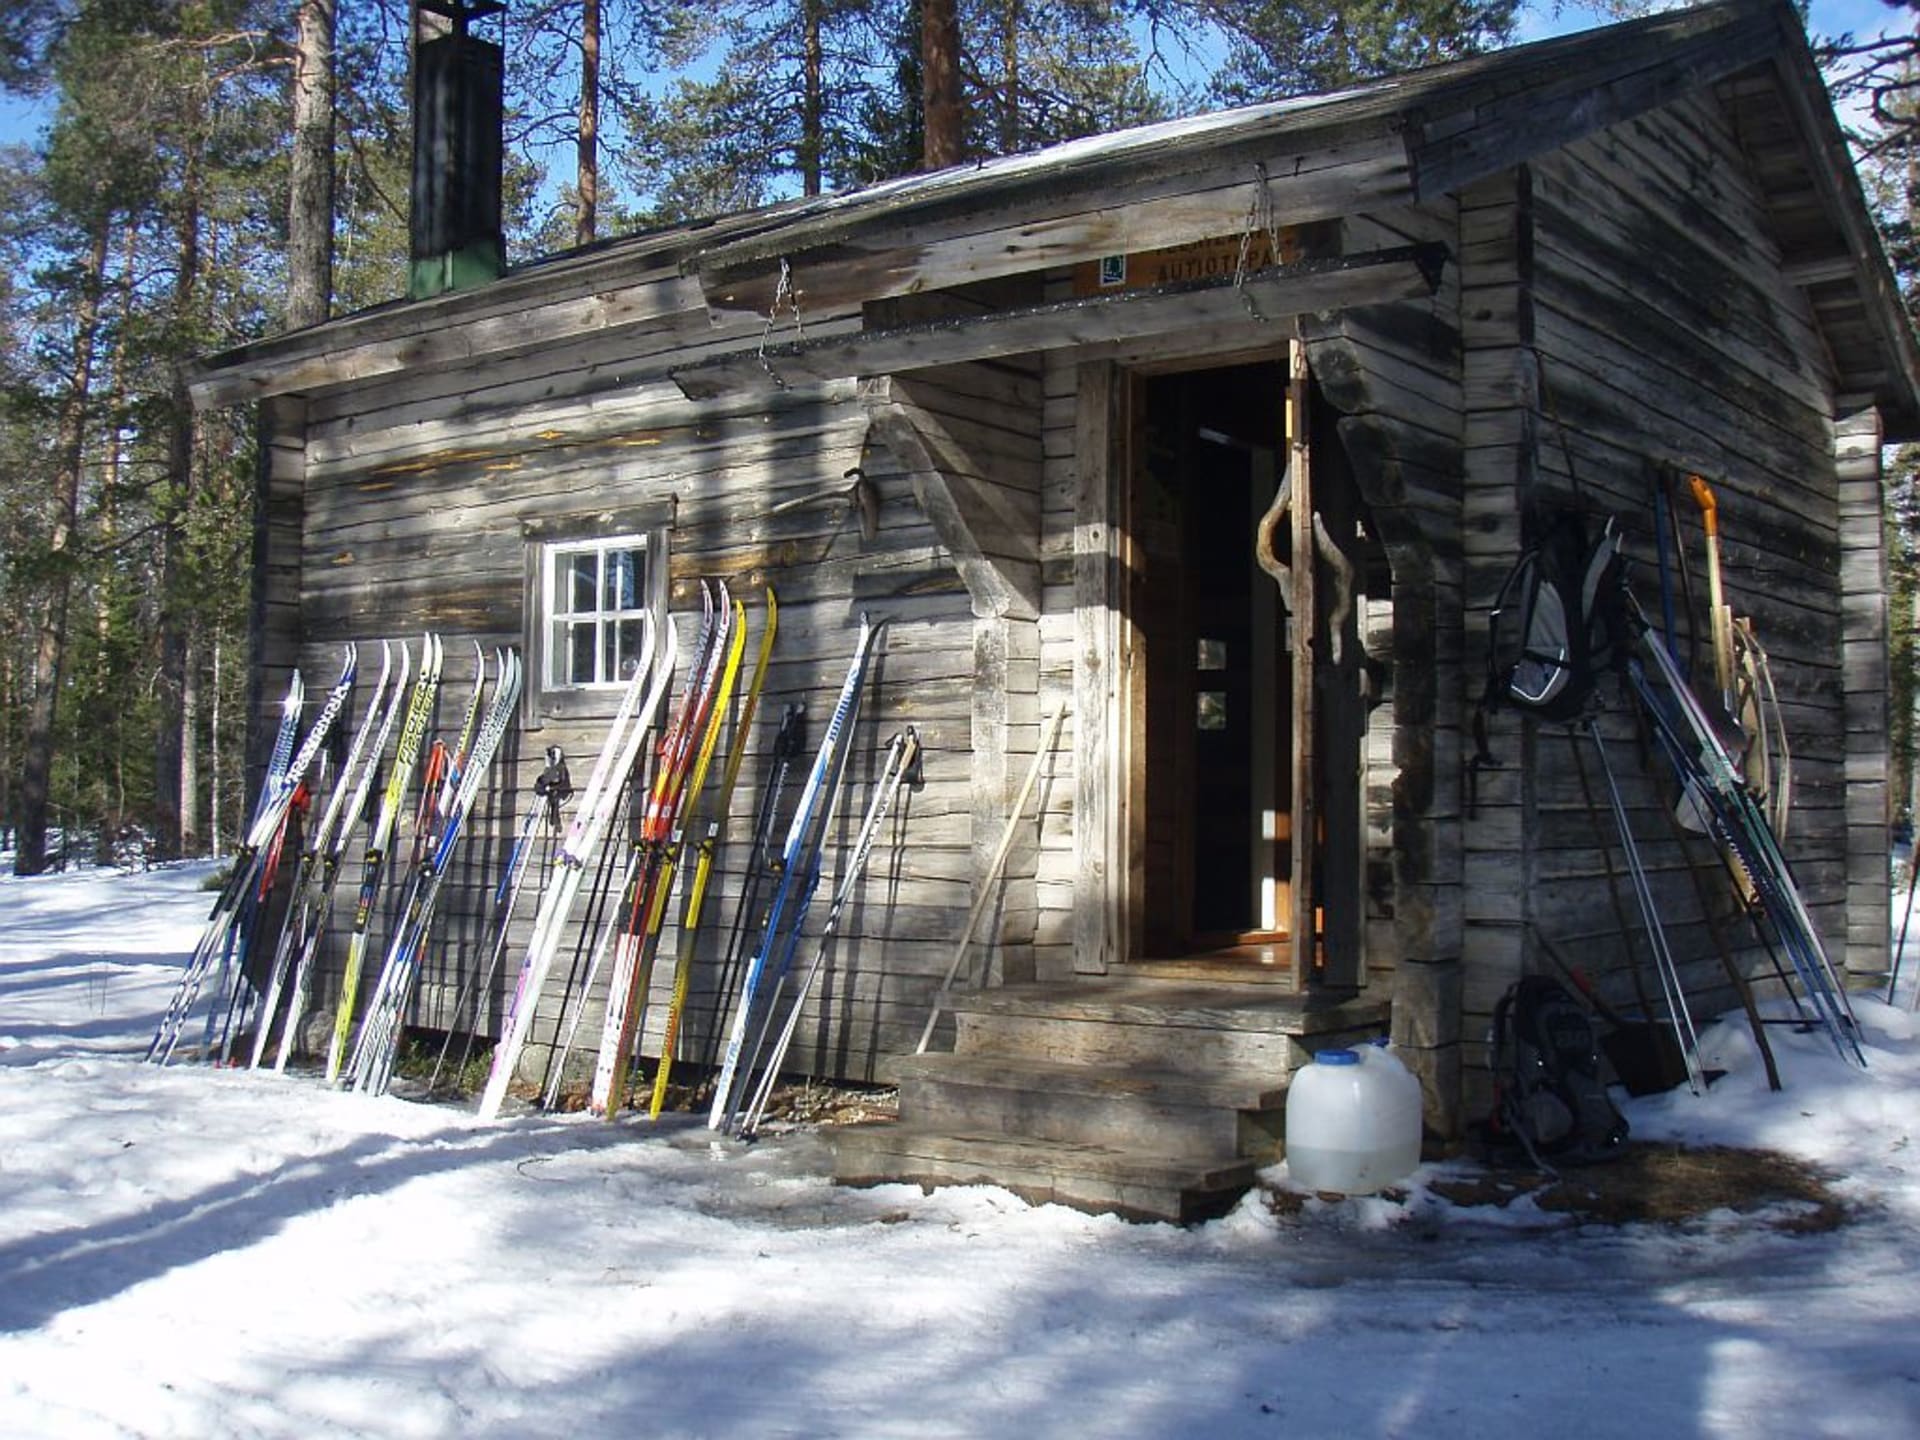 A wooden wilderness hut with a lot of skis lying against the wall